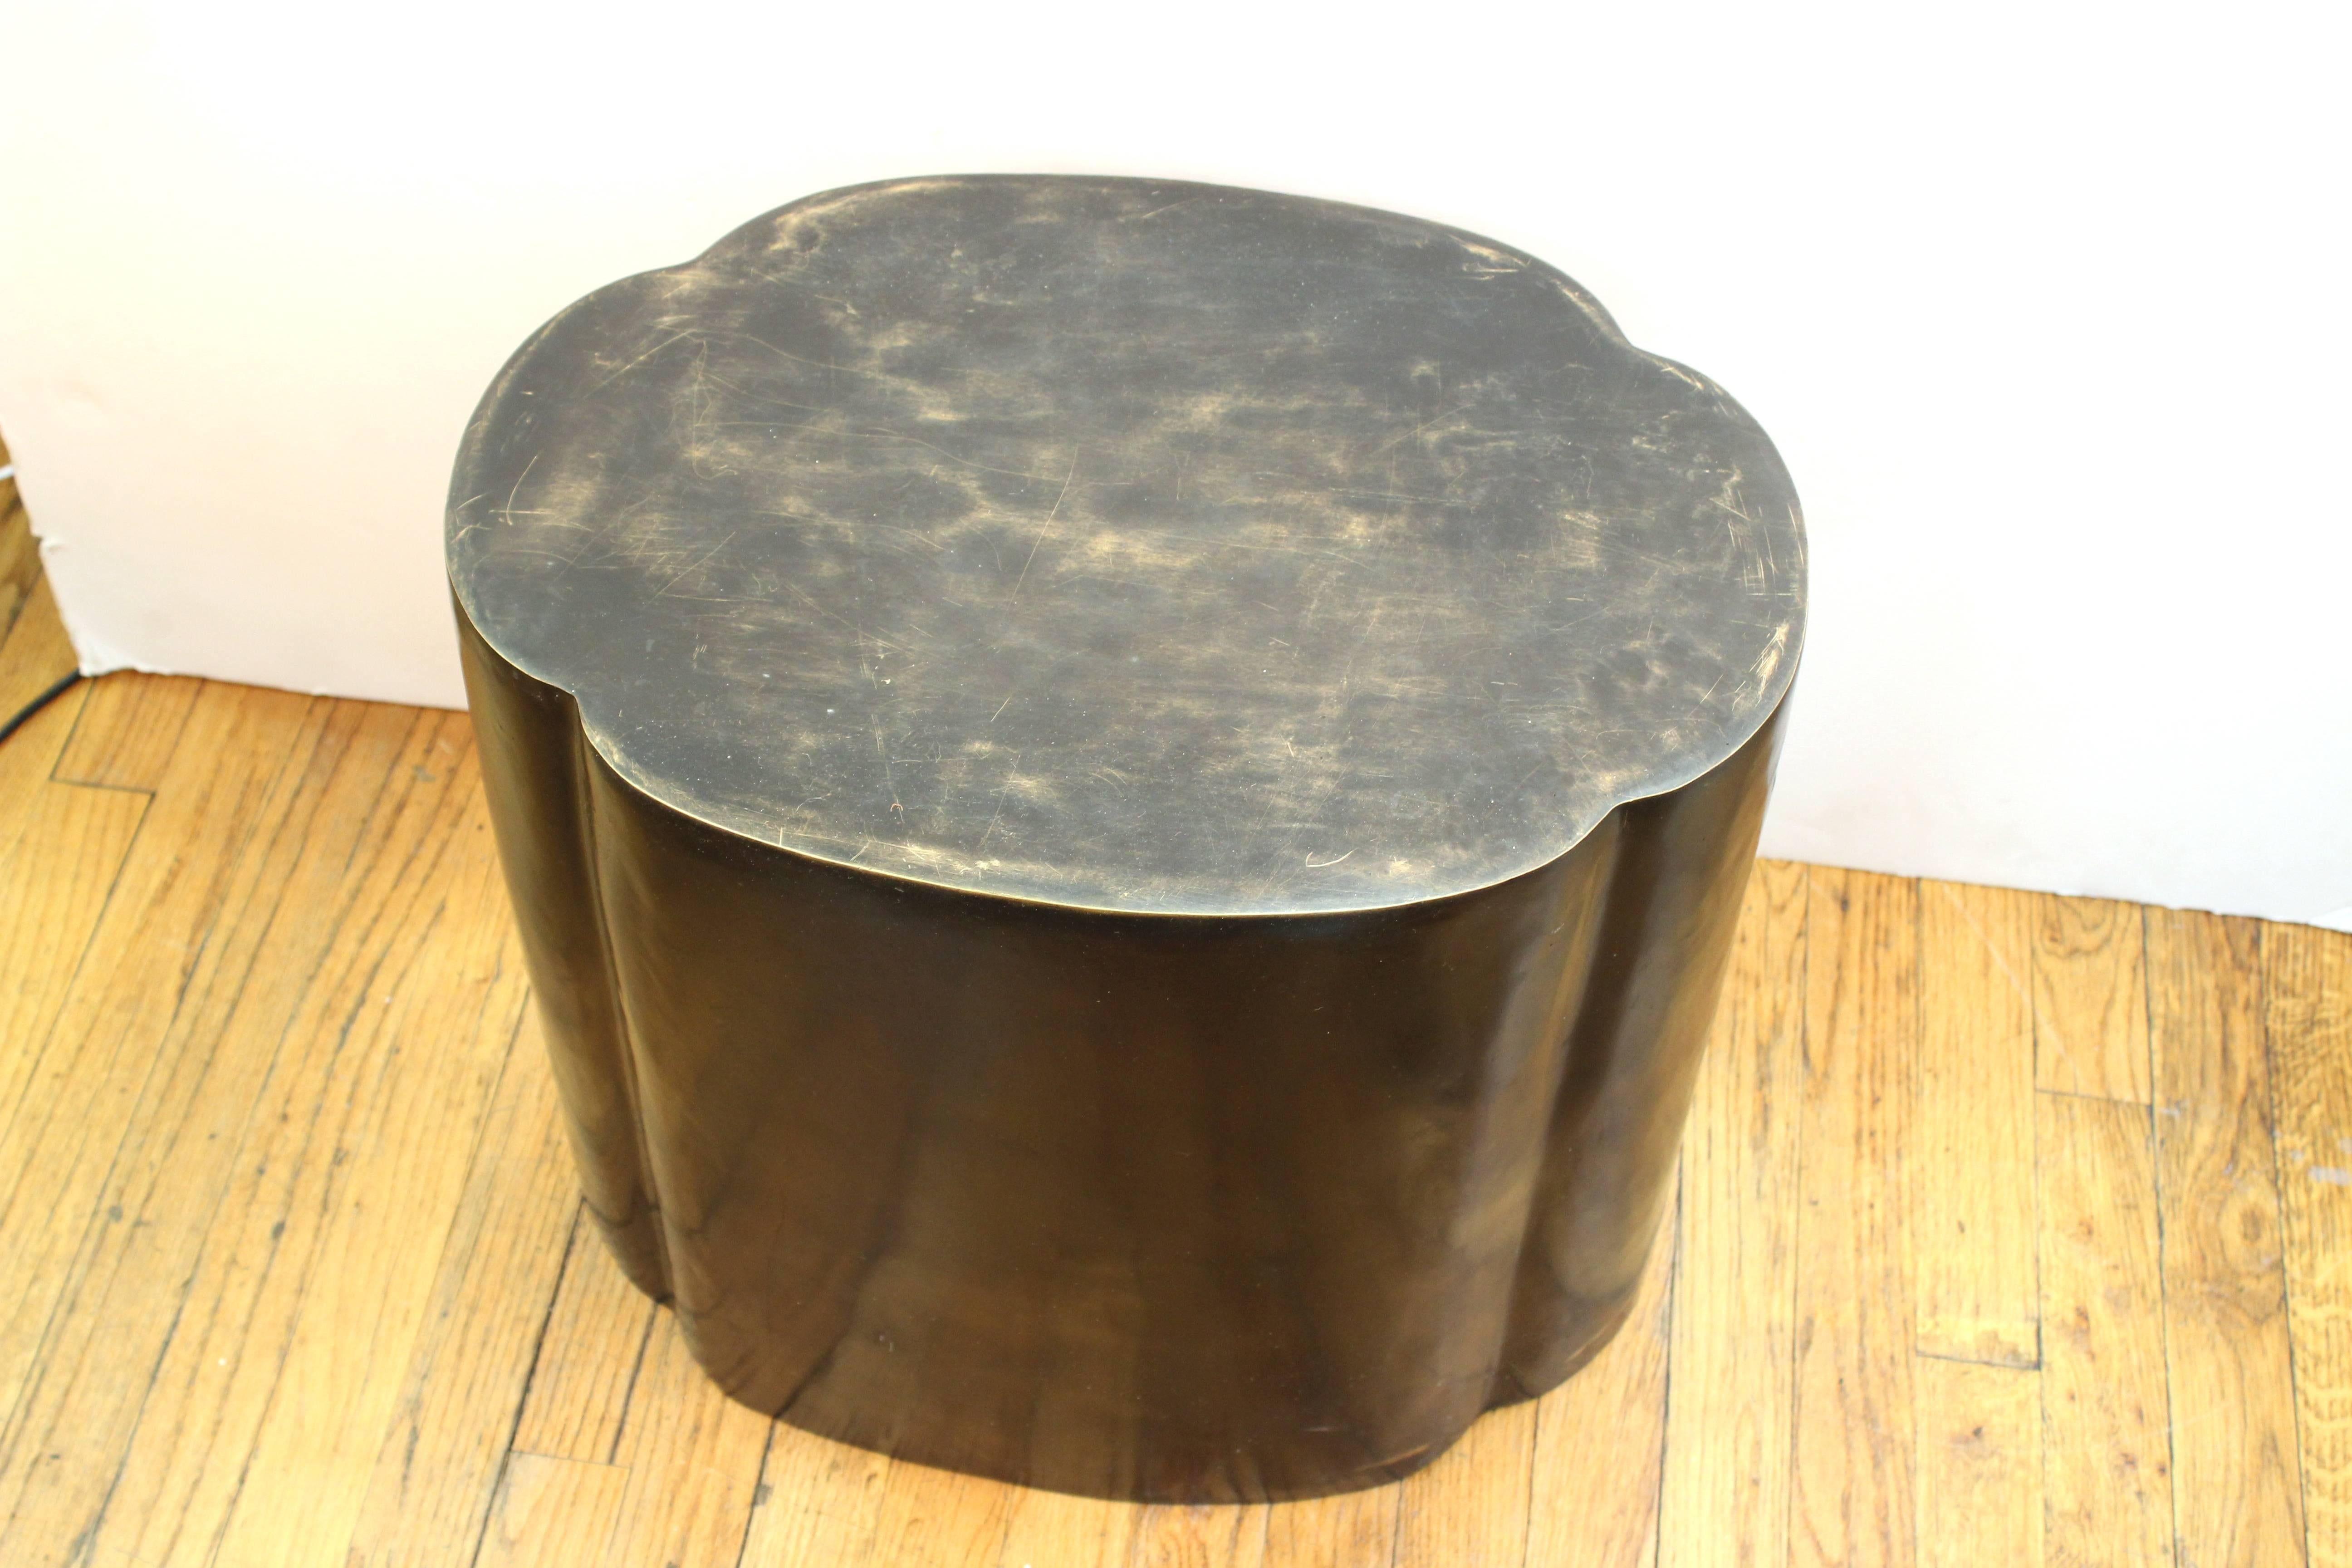 Garden stool in bronze. Lozenge shaped and hollow with cut-outs on each side. Wear to surface and patina due to use and material. The stool is in good condition.